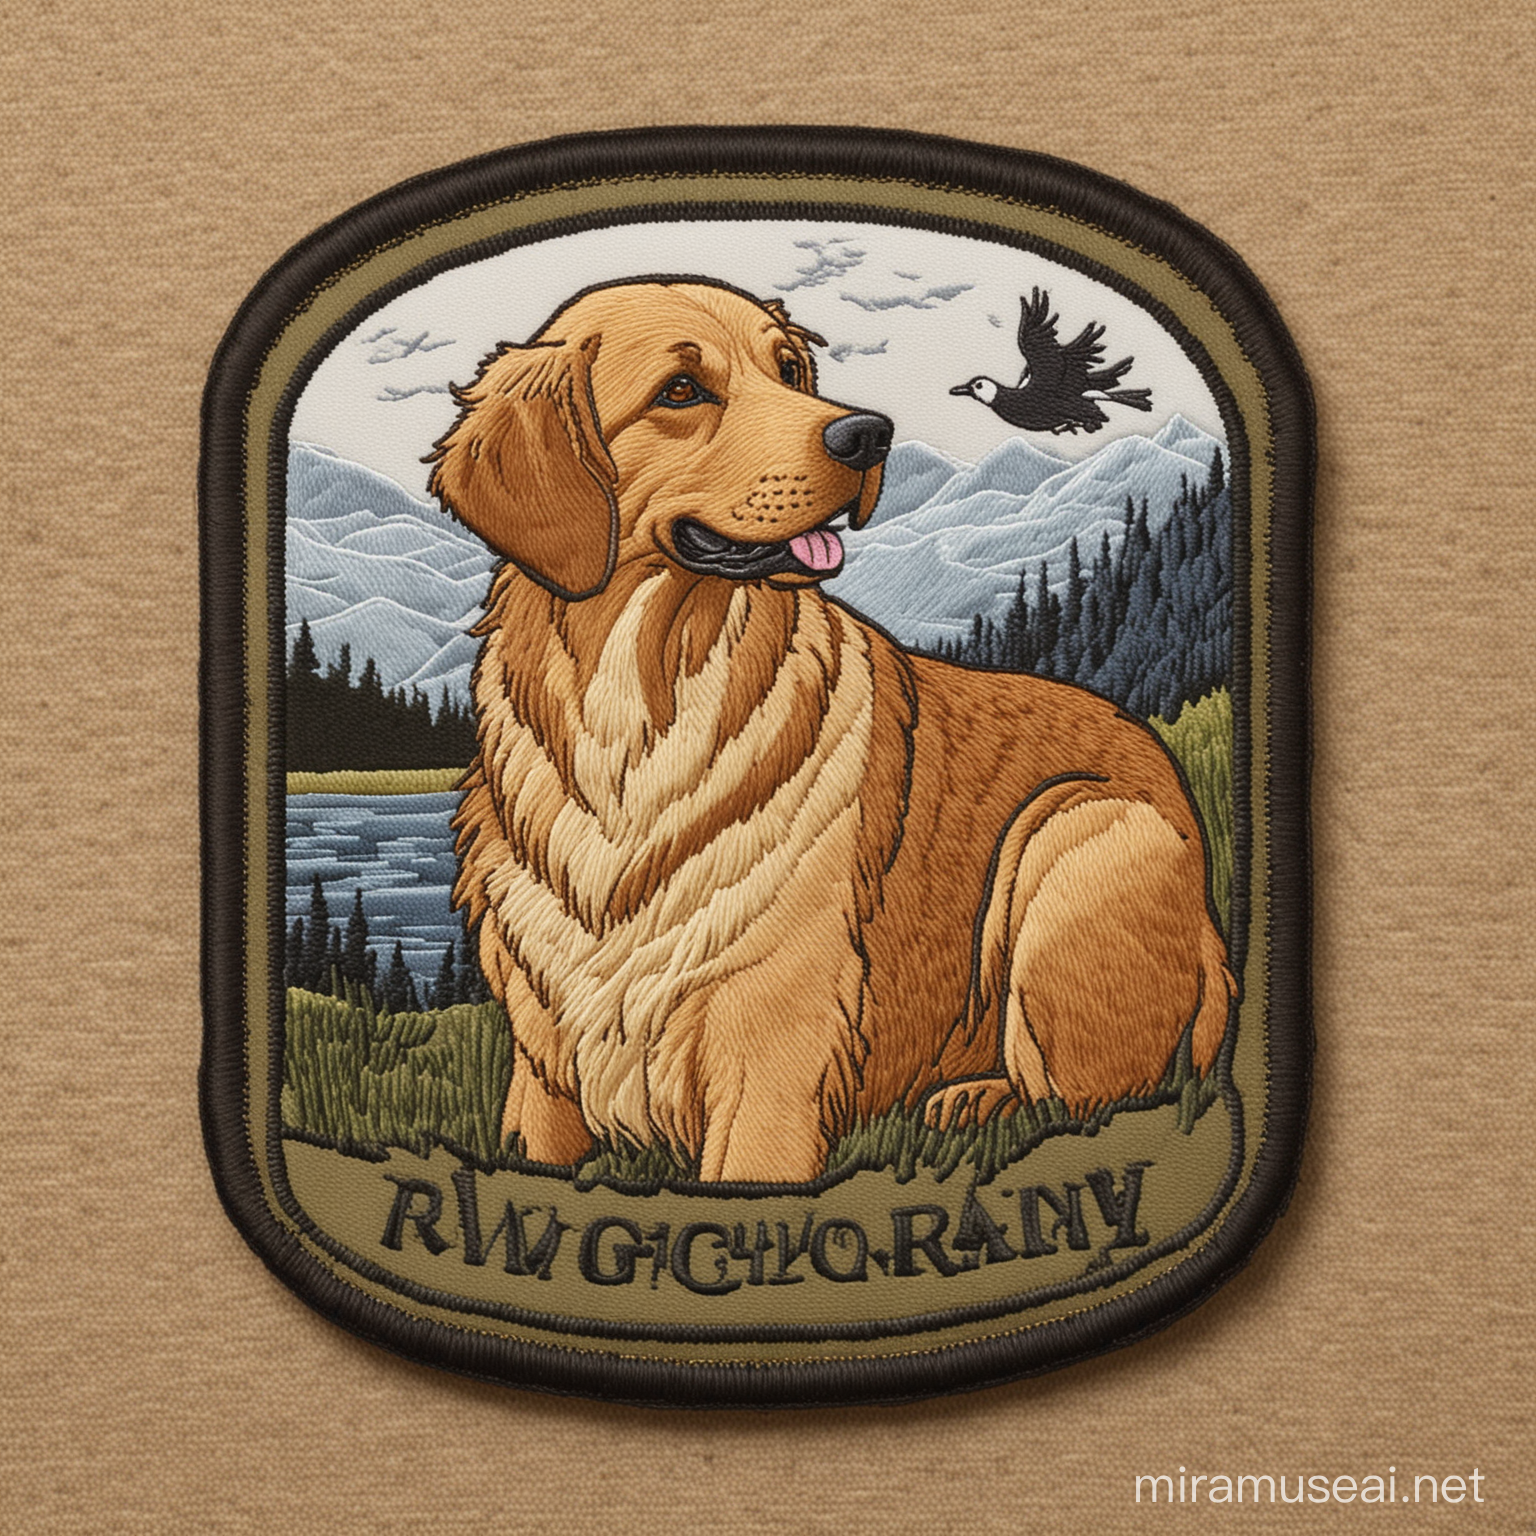 Cartoon Style Embroidered Patch with Hunting Dog and Canada Goose